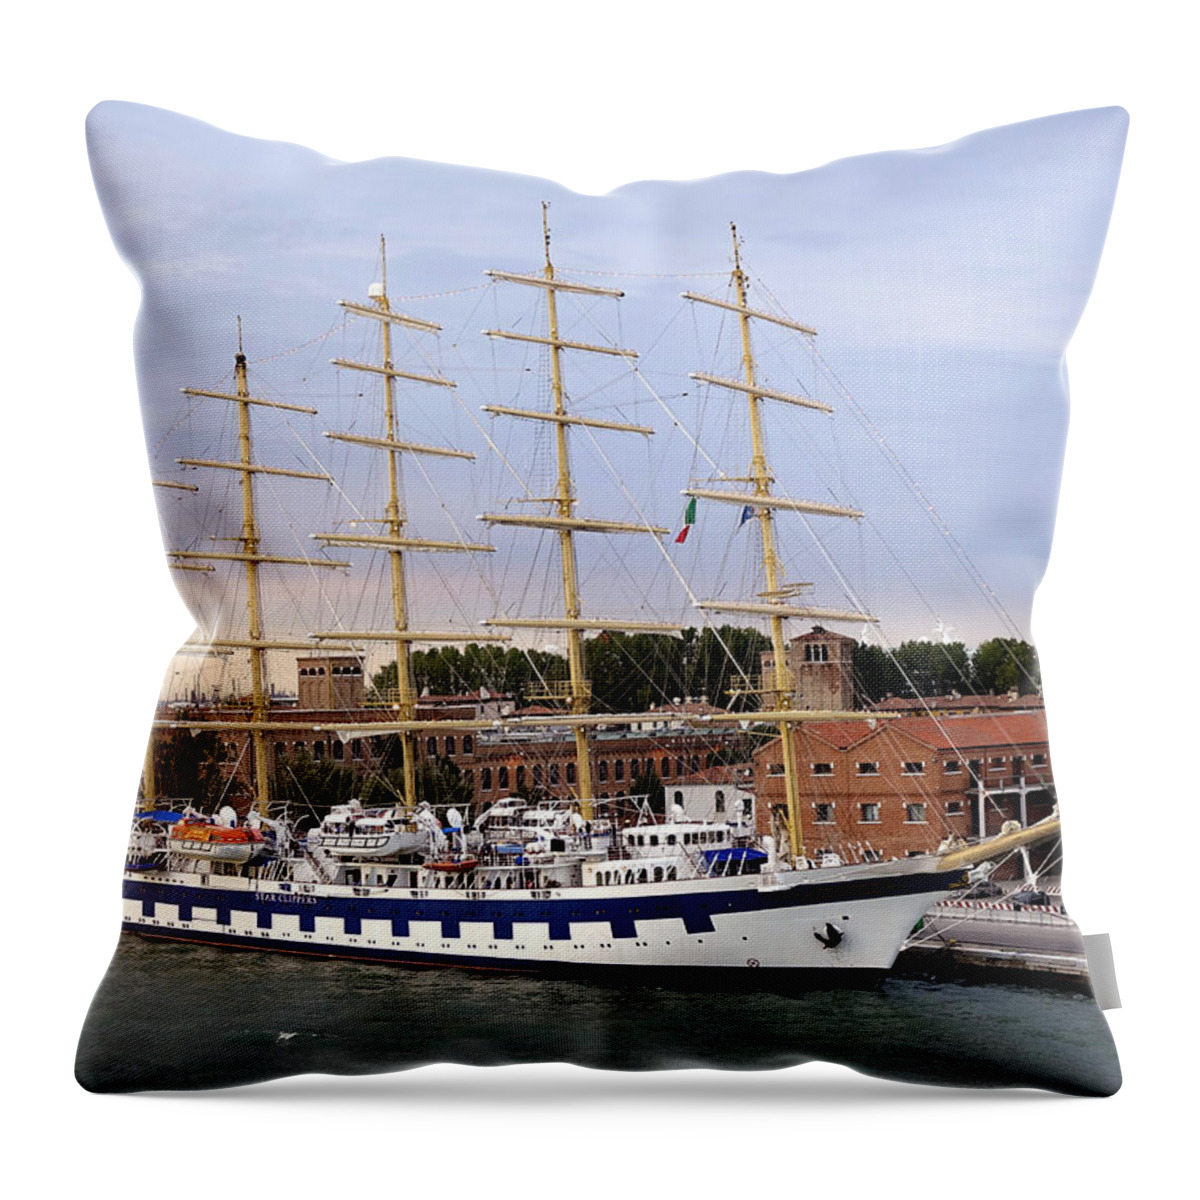 Star Cruise Line Throw Pillow featuring the photograph The Royal Clipper Docked In Venice Italy by Rick Rosenshein